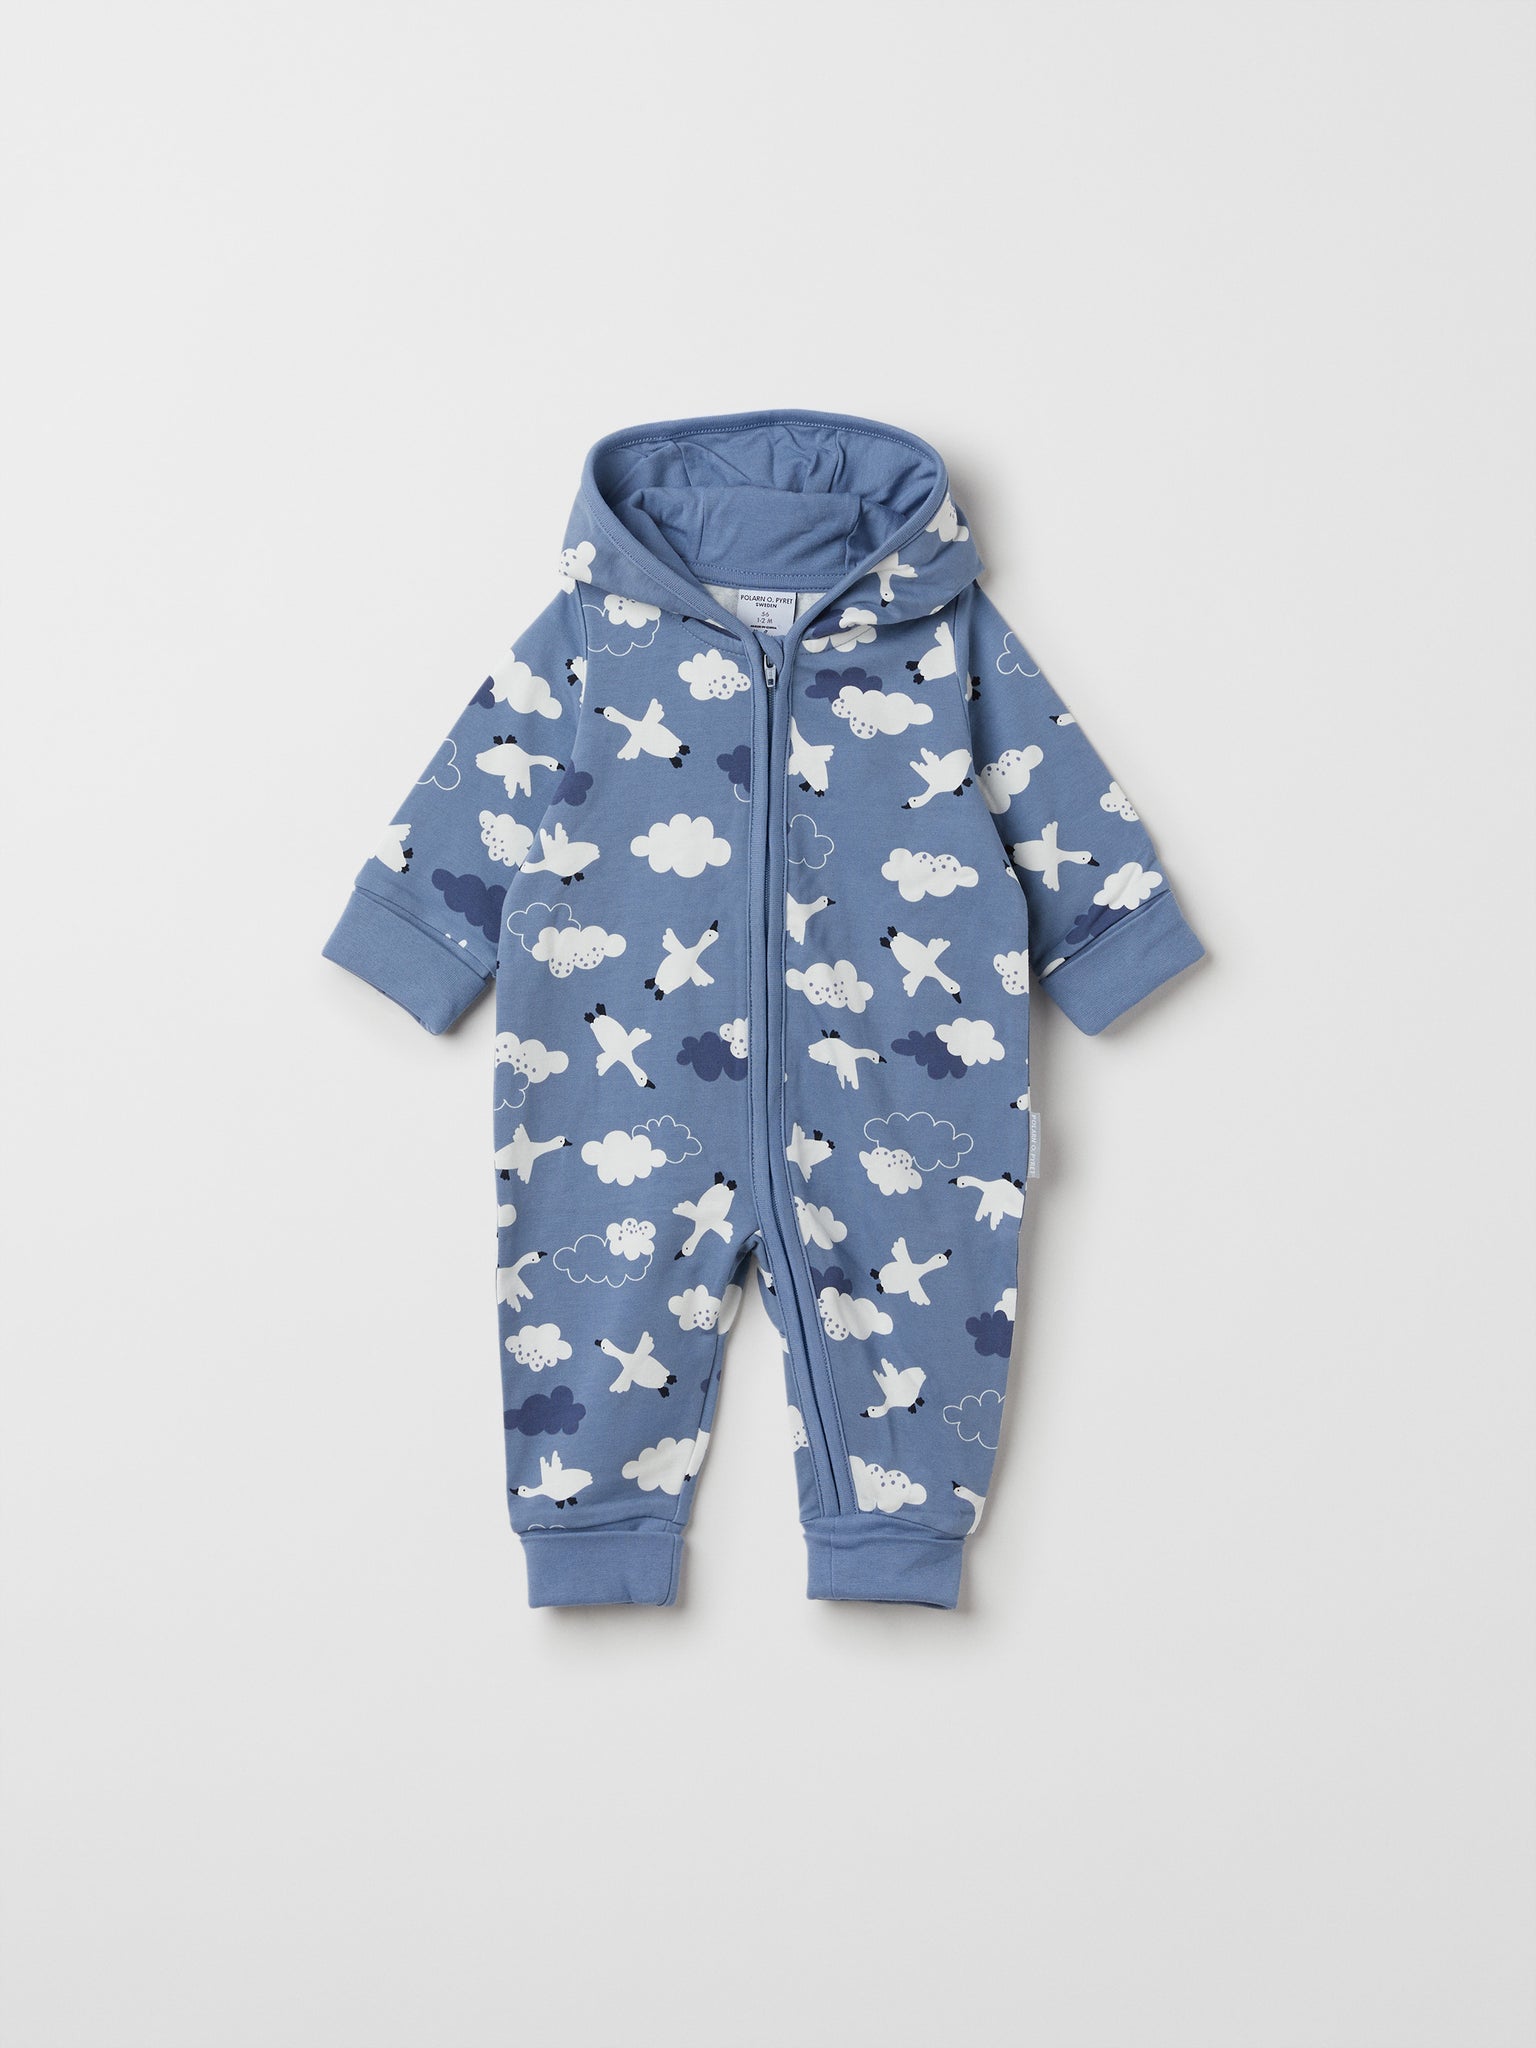 Organic Cotton Blue Baby All-In-One from the Polarn O. Pyret baby collection. The best ethical baby clothes